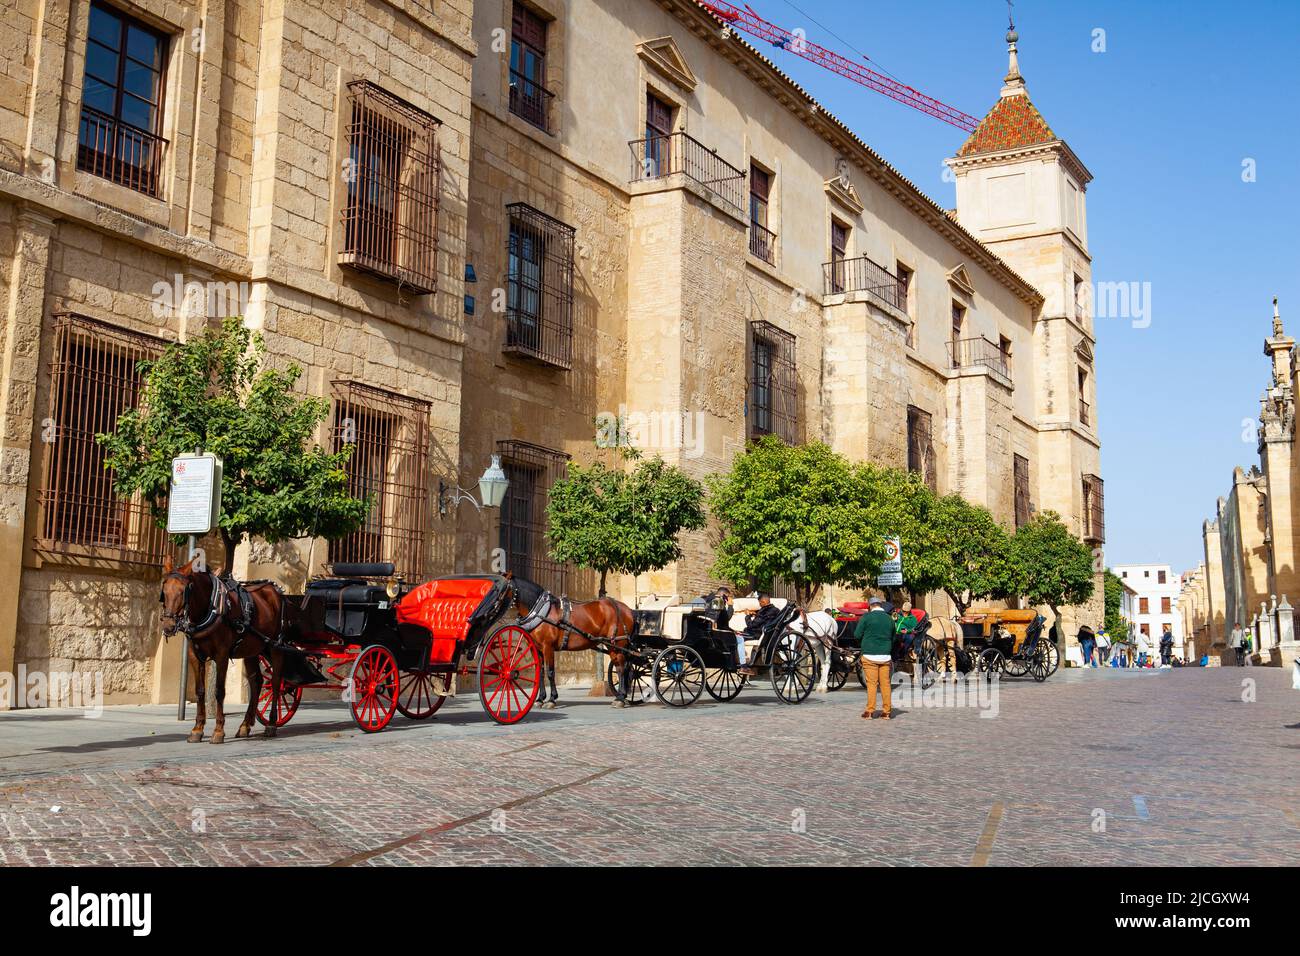 Cordoba, Spain - February 11,2022: Red horse carriage parked next to the mosque of Cordoba, Andalusia, Spain. Horse and sleigh ride on Cordoba street. Stock Photo